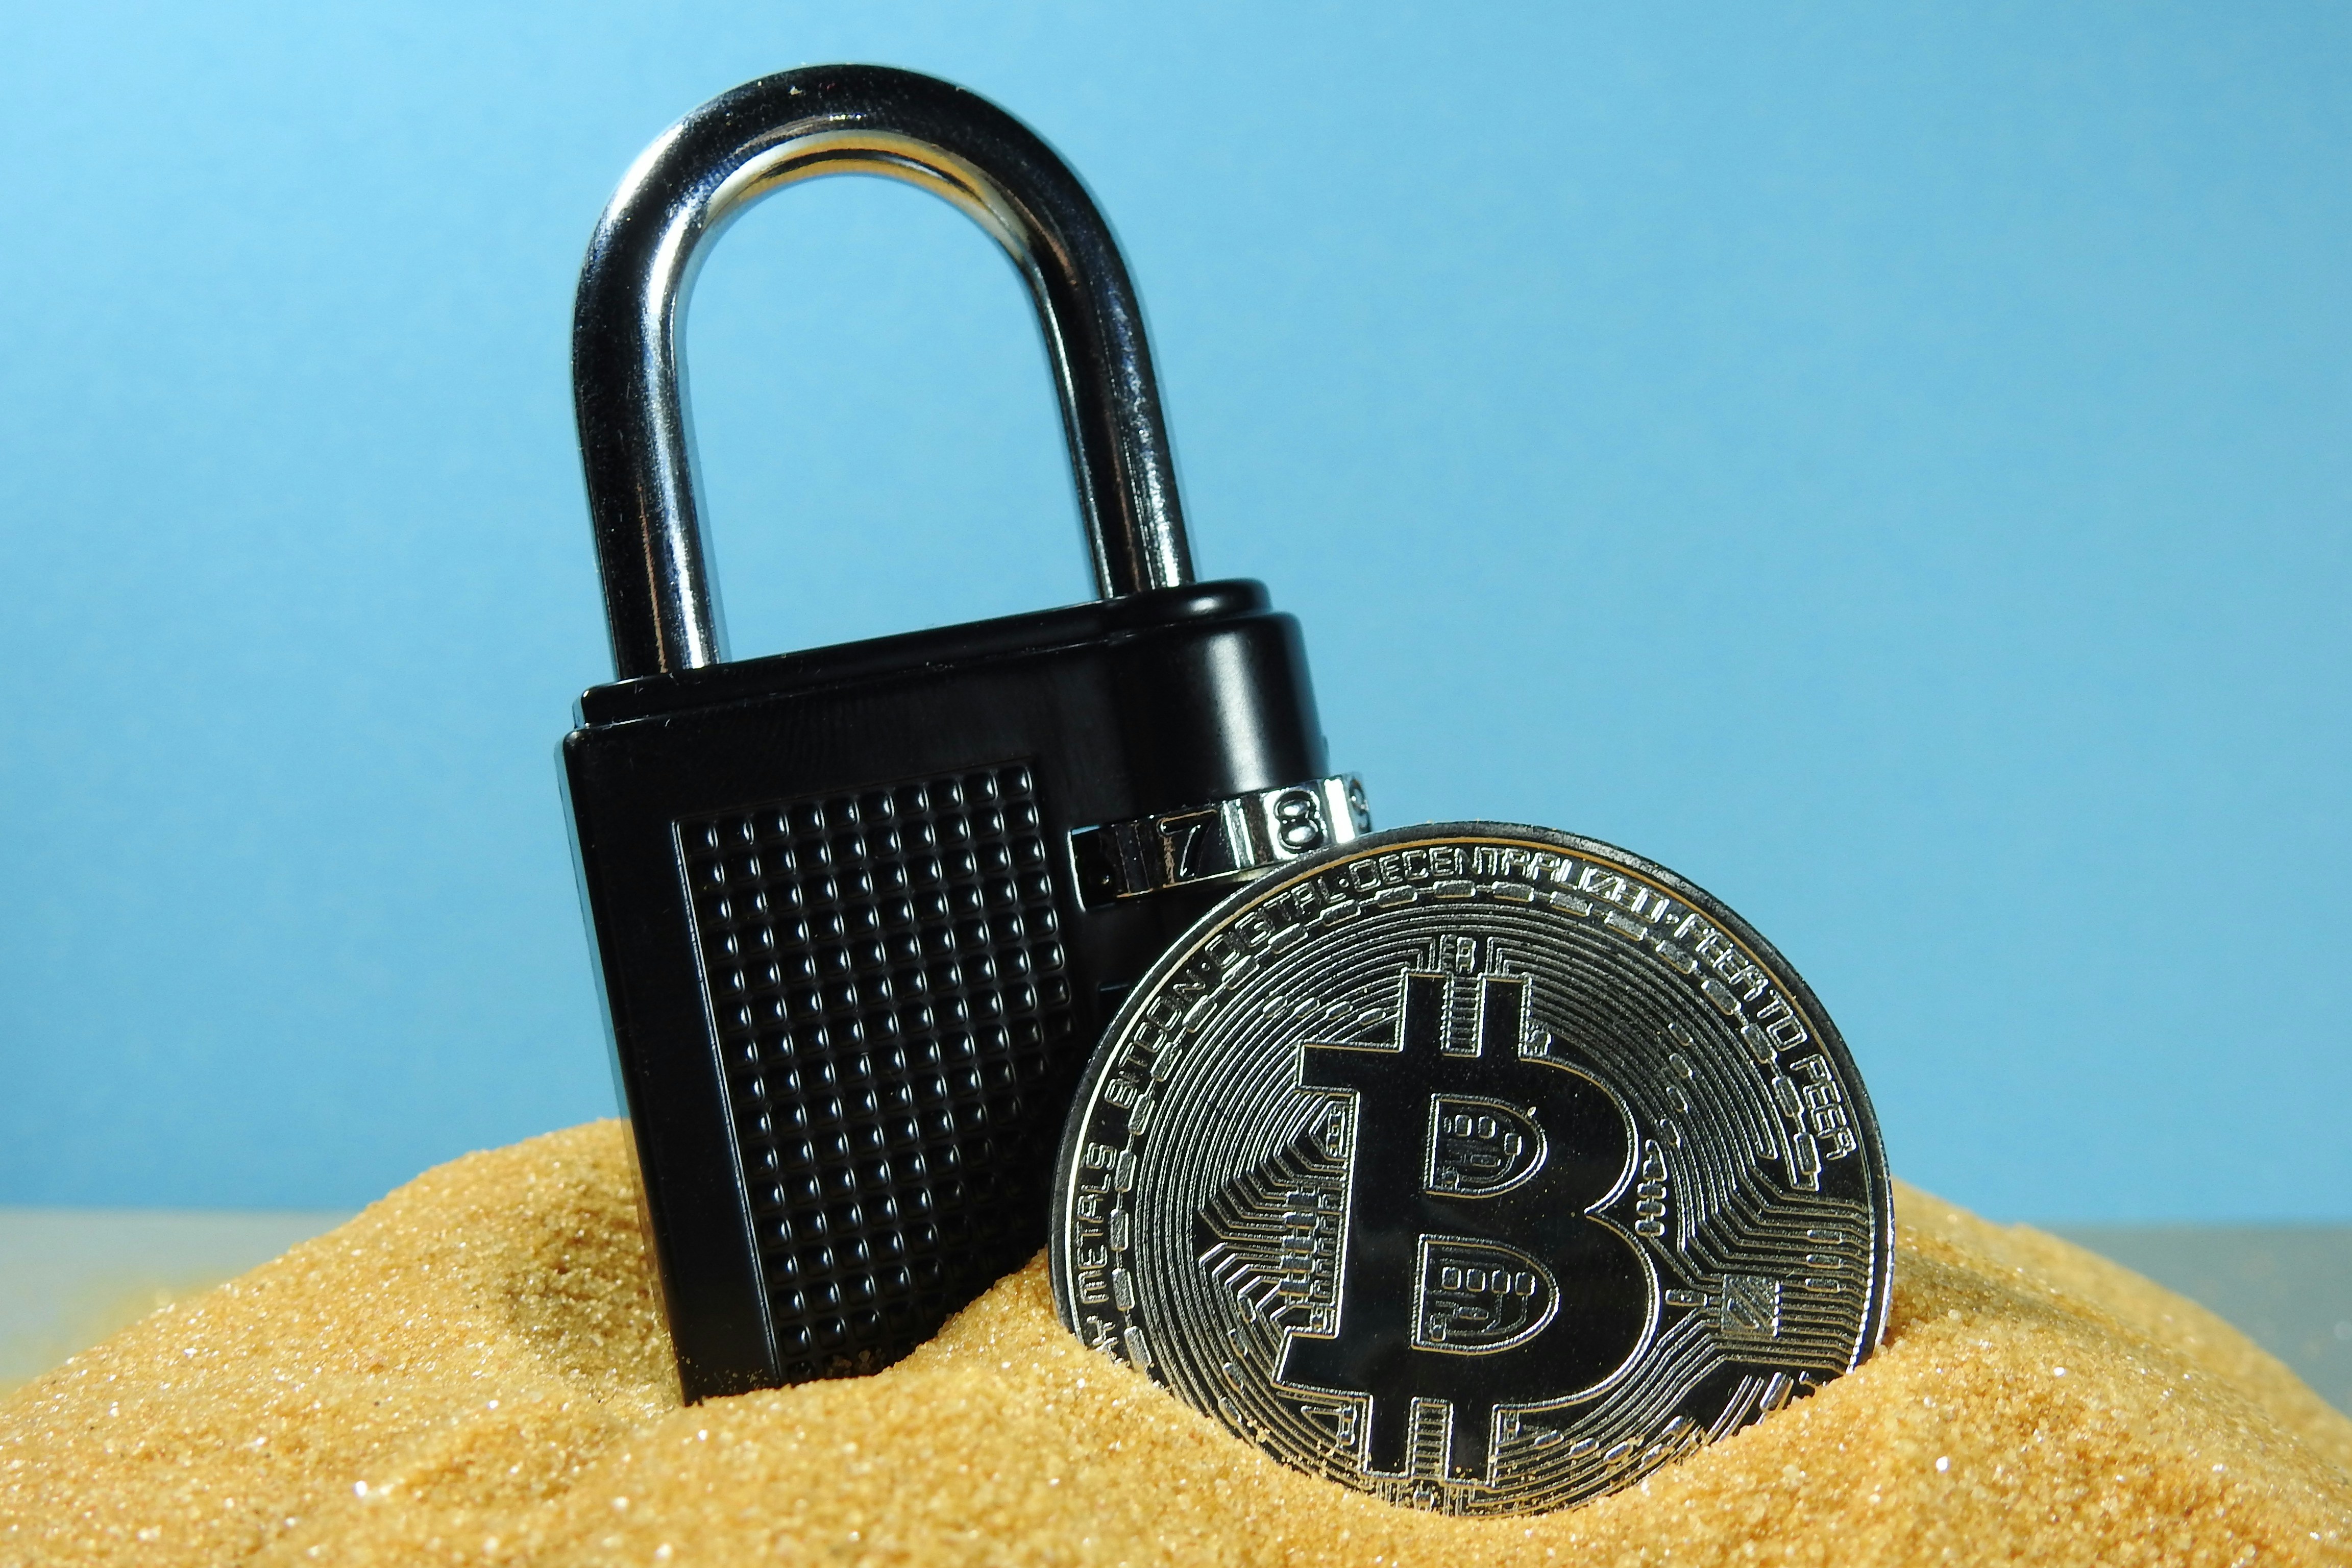 Hands-On Guide to Security Best Practices in the Bitcoin World